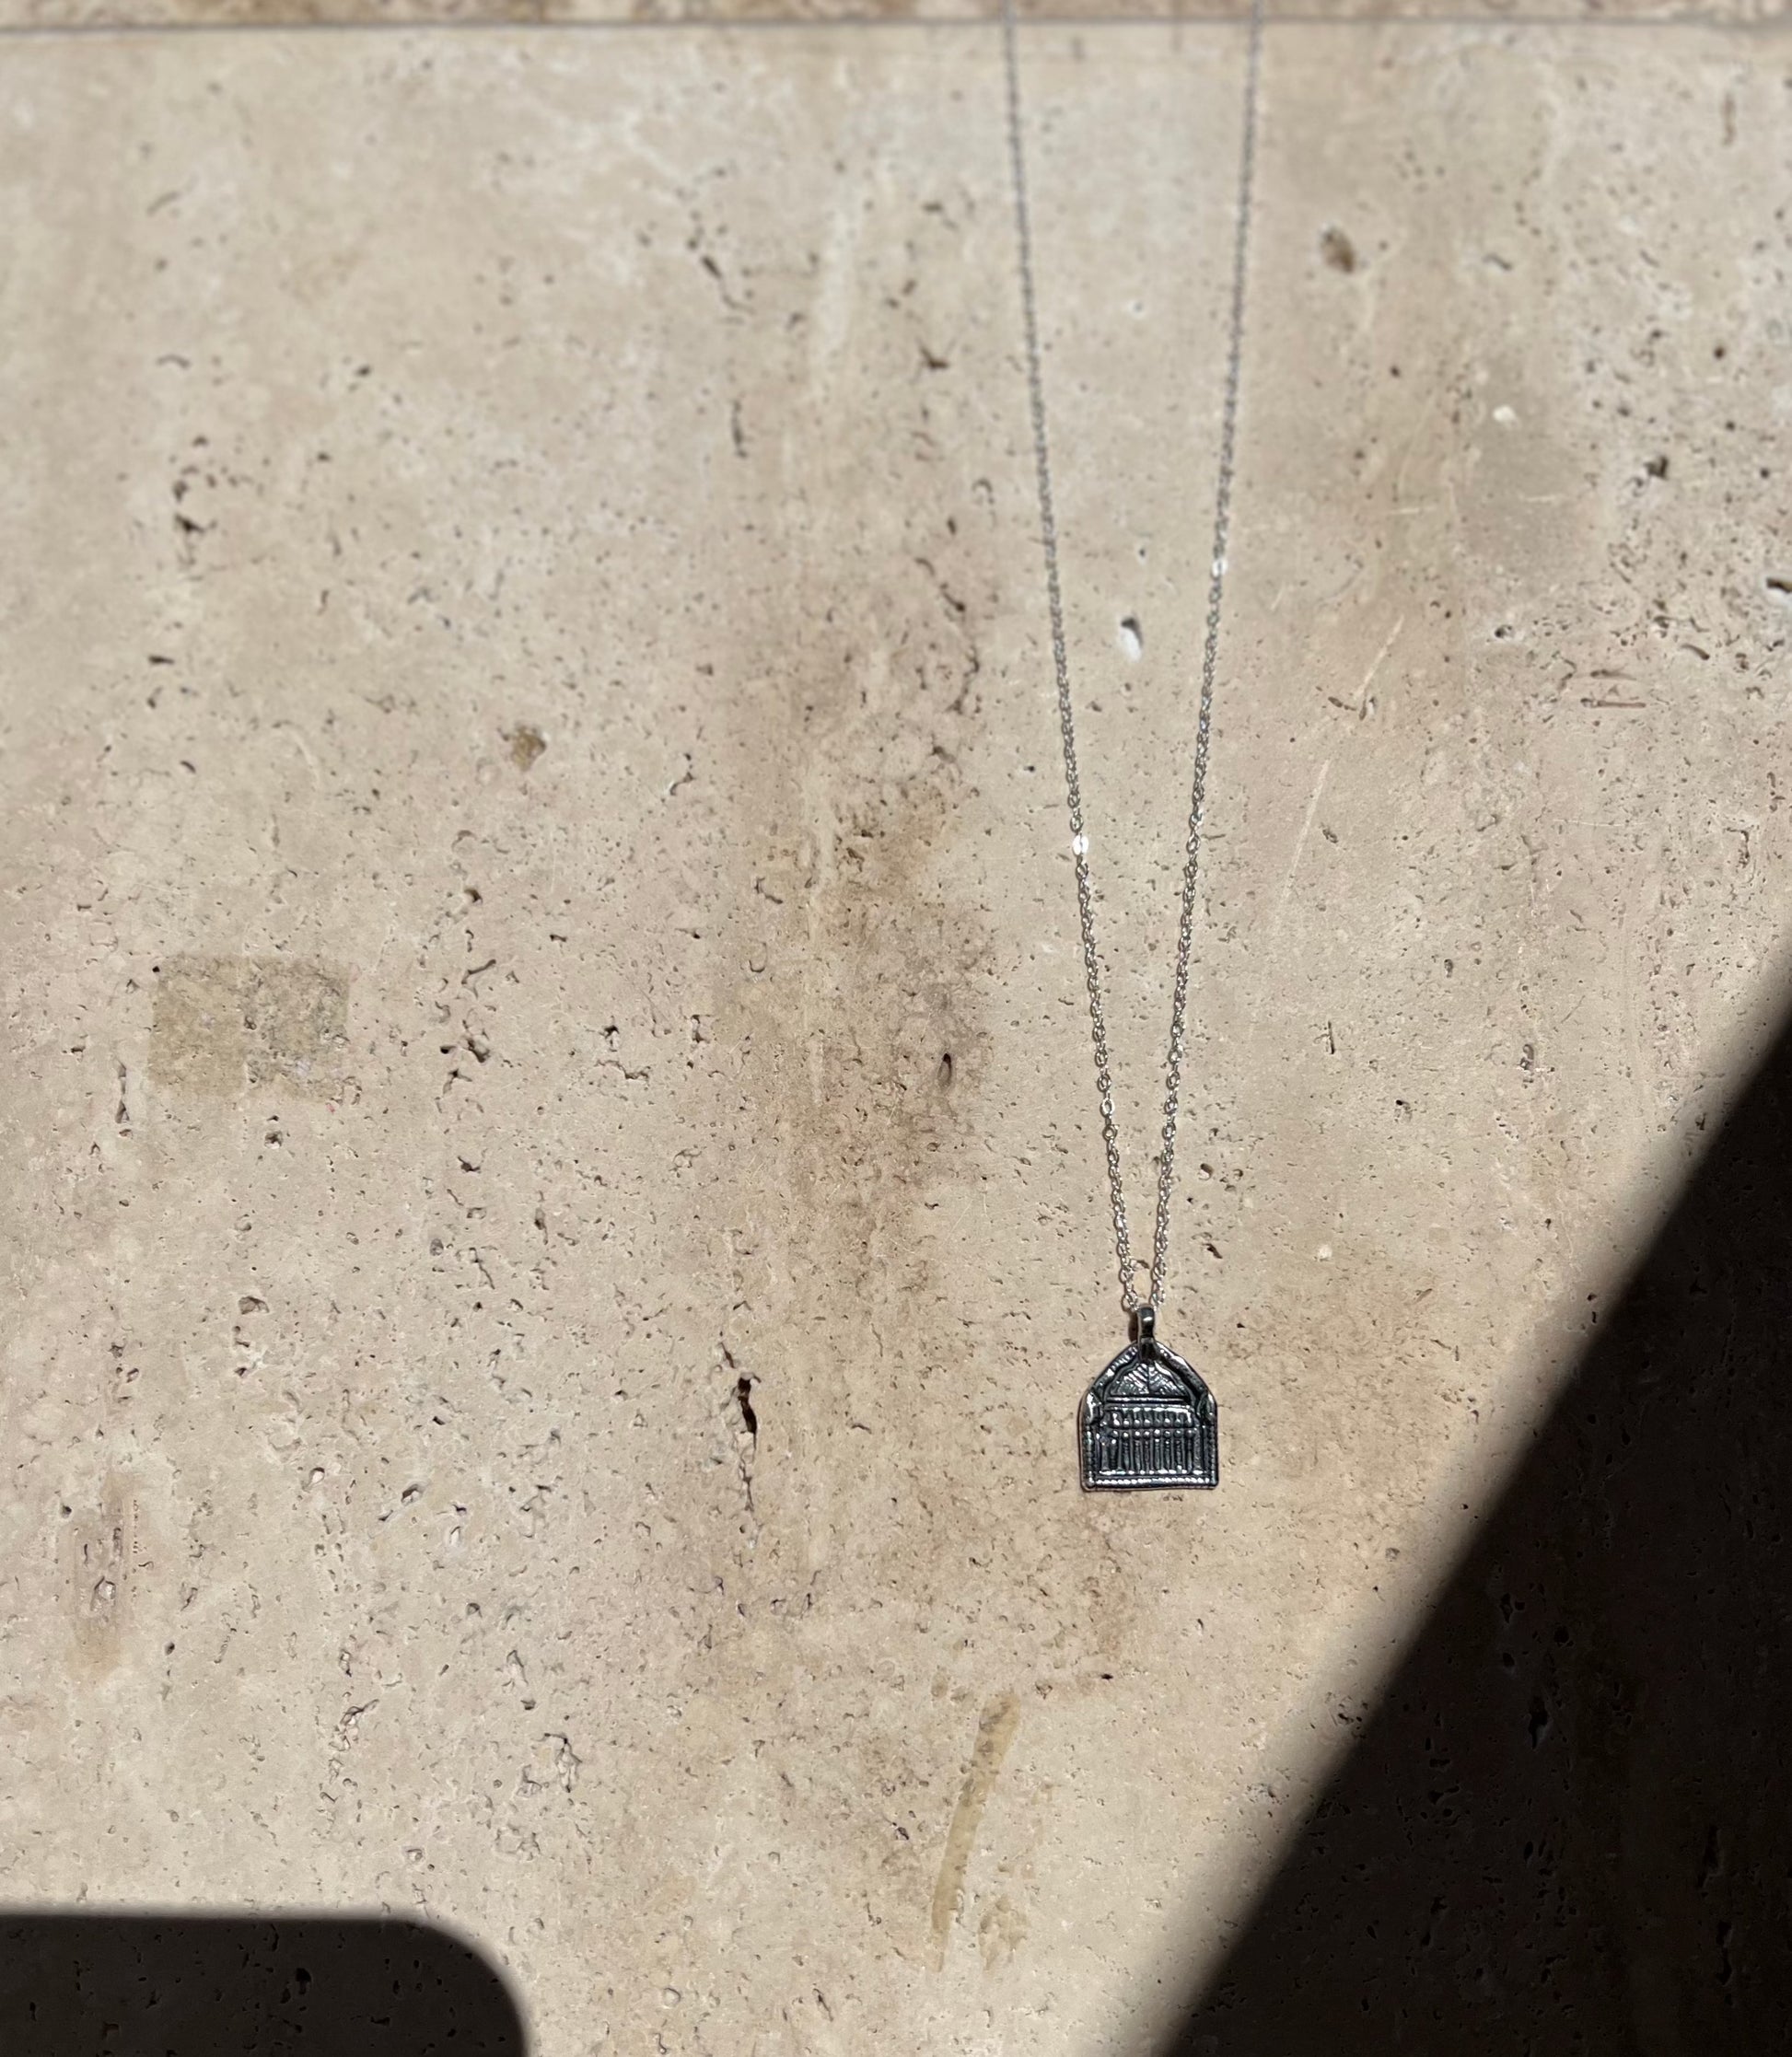 Delicate light weight hand carved charm necklace designed to represent a door, passageway or opportunity. Recycled brass pendant coated in a thick layer of high grade 14k gold or sterling silver. Handmade in the Santa Cruz Mountains.